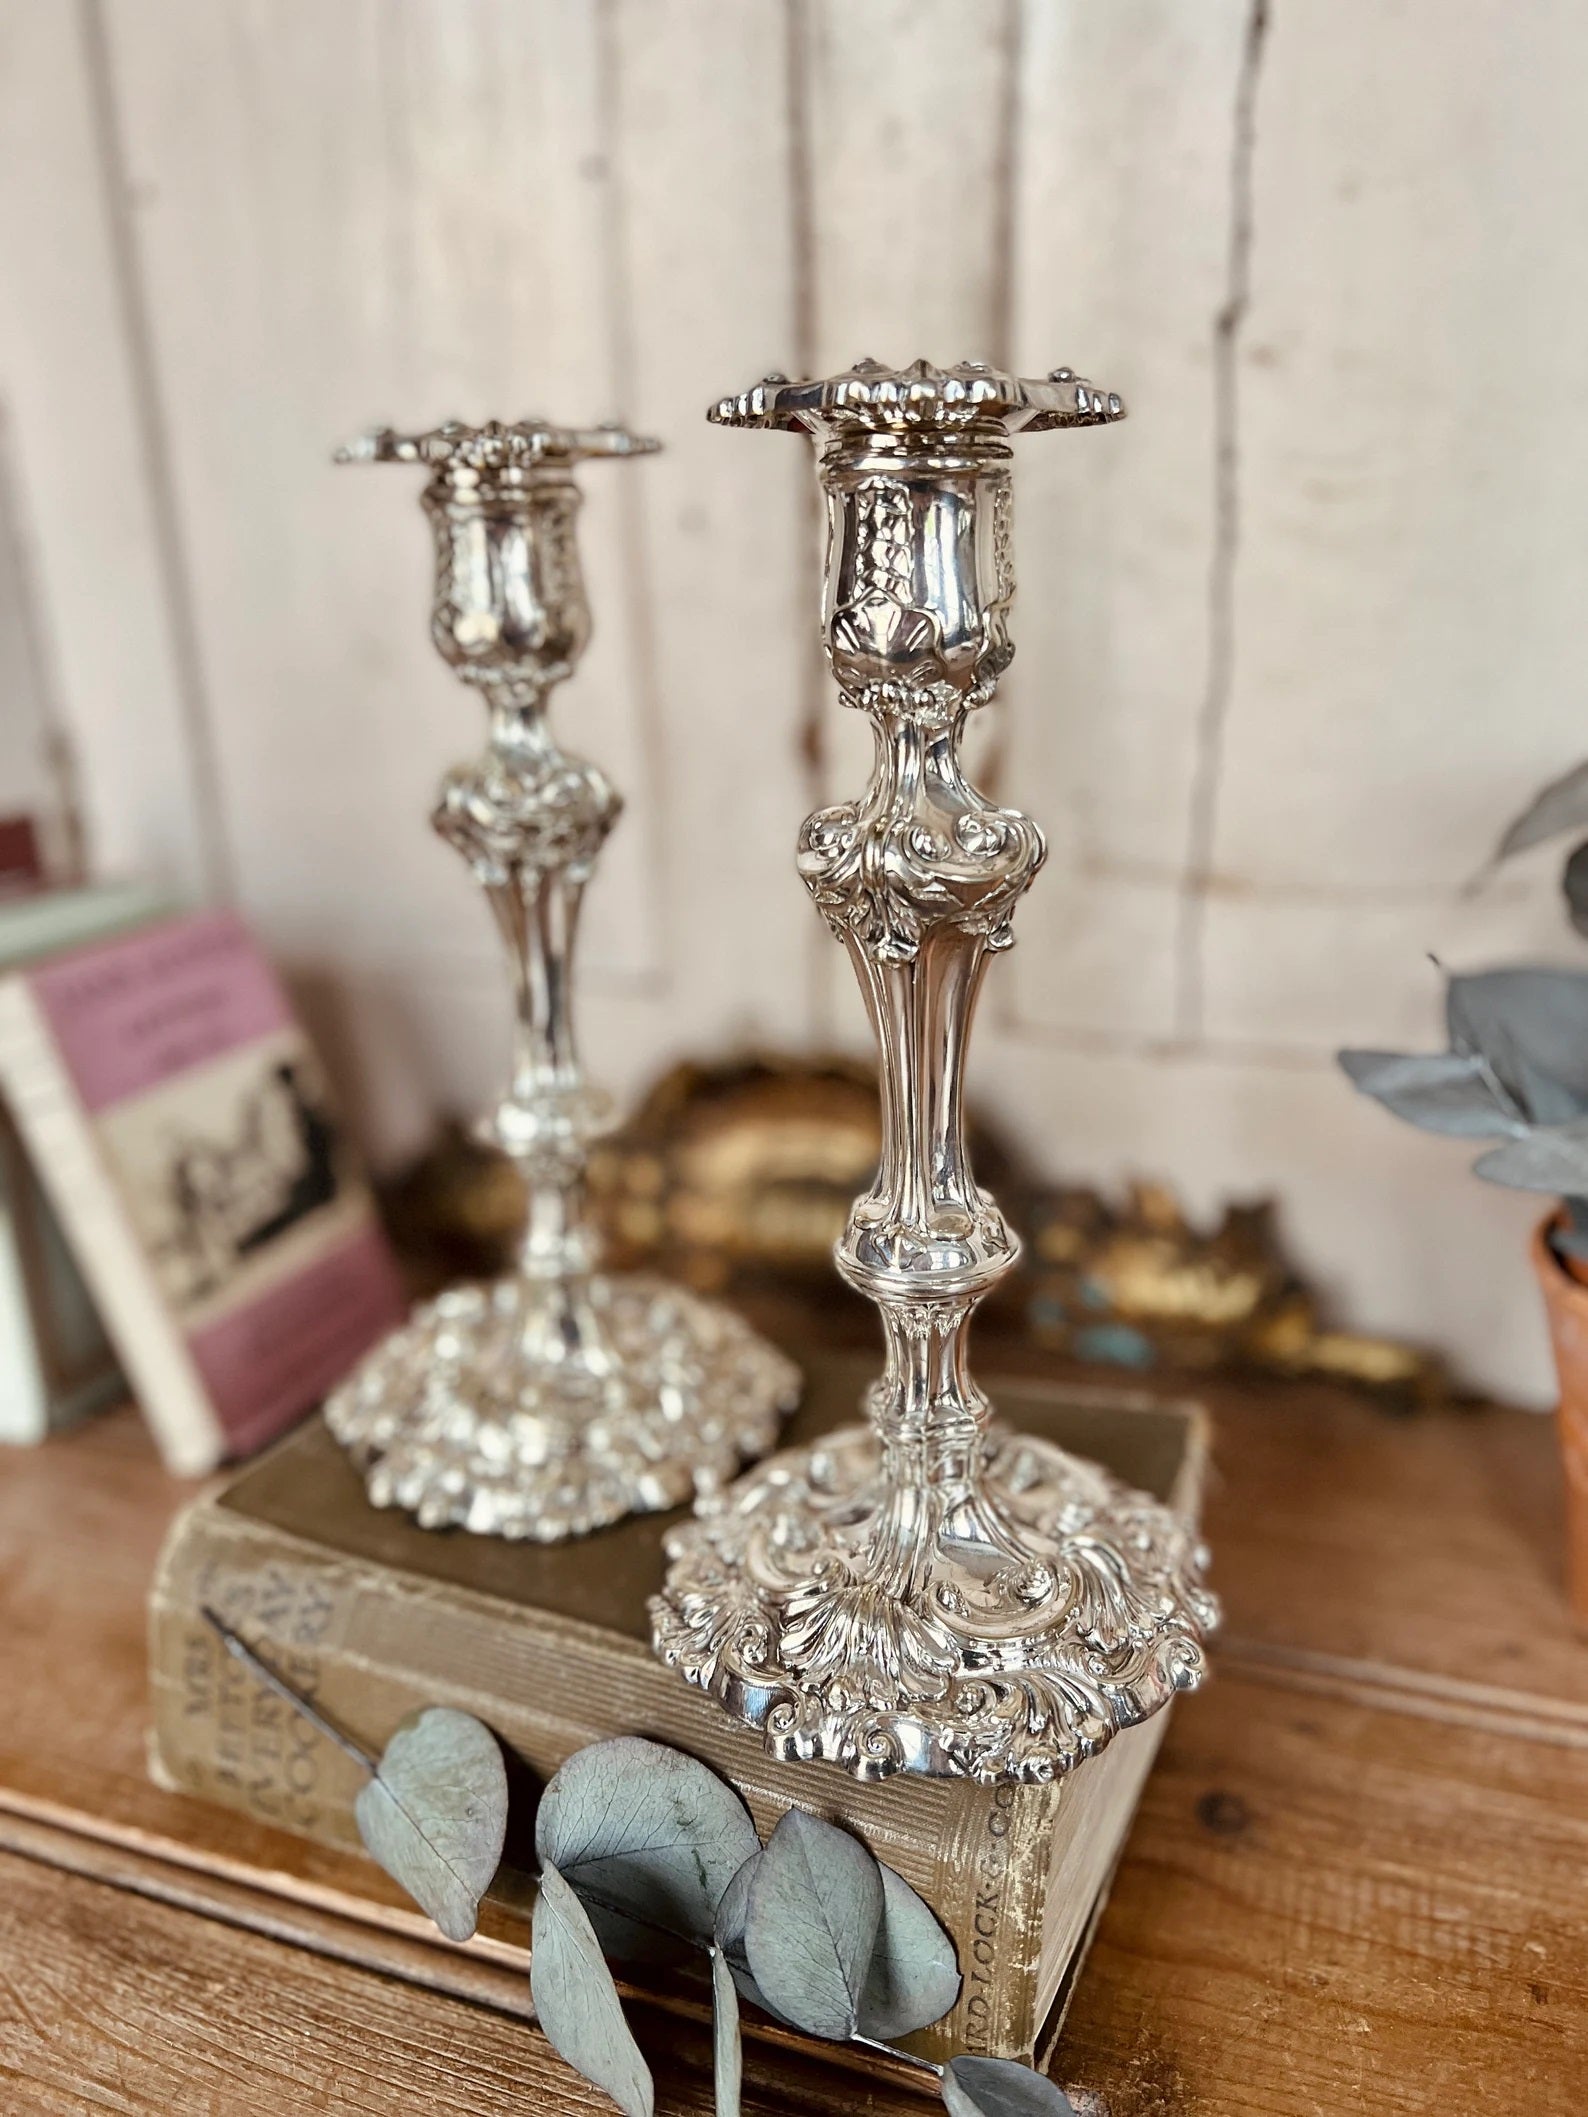 Antique silver, a pair of Rococo-style silver candlesticks, pressed, cast and chased. Circular, curved feet with hinged. This pair of large antique silver candlesticks was made in the early 19th century and is a hugely impressive example from the